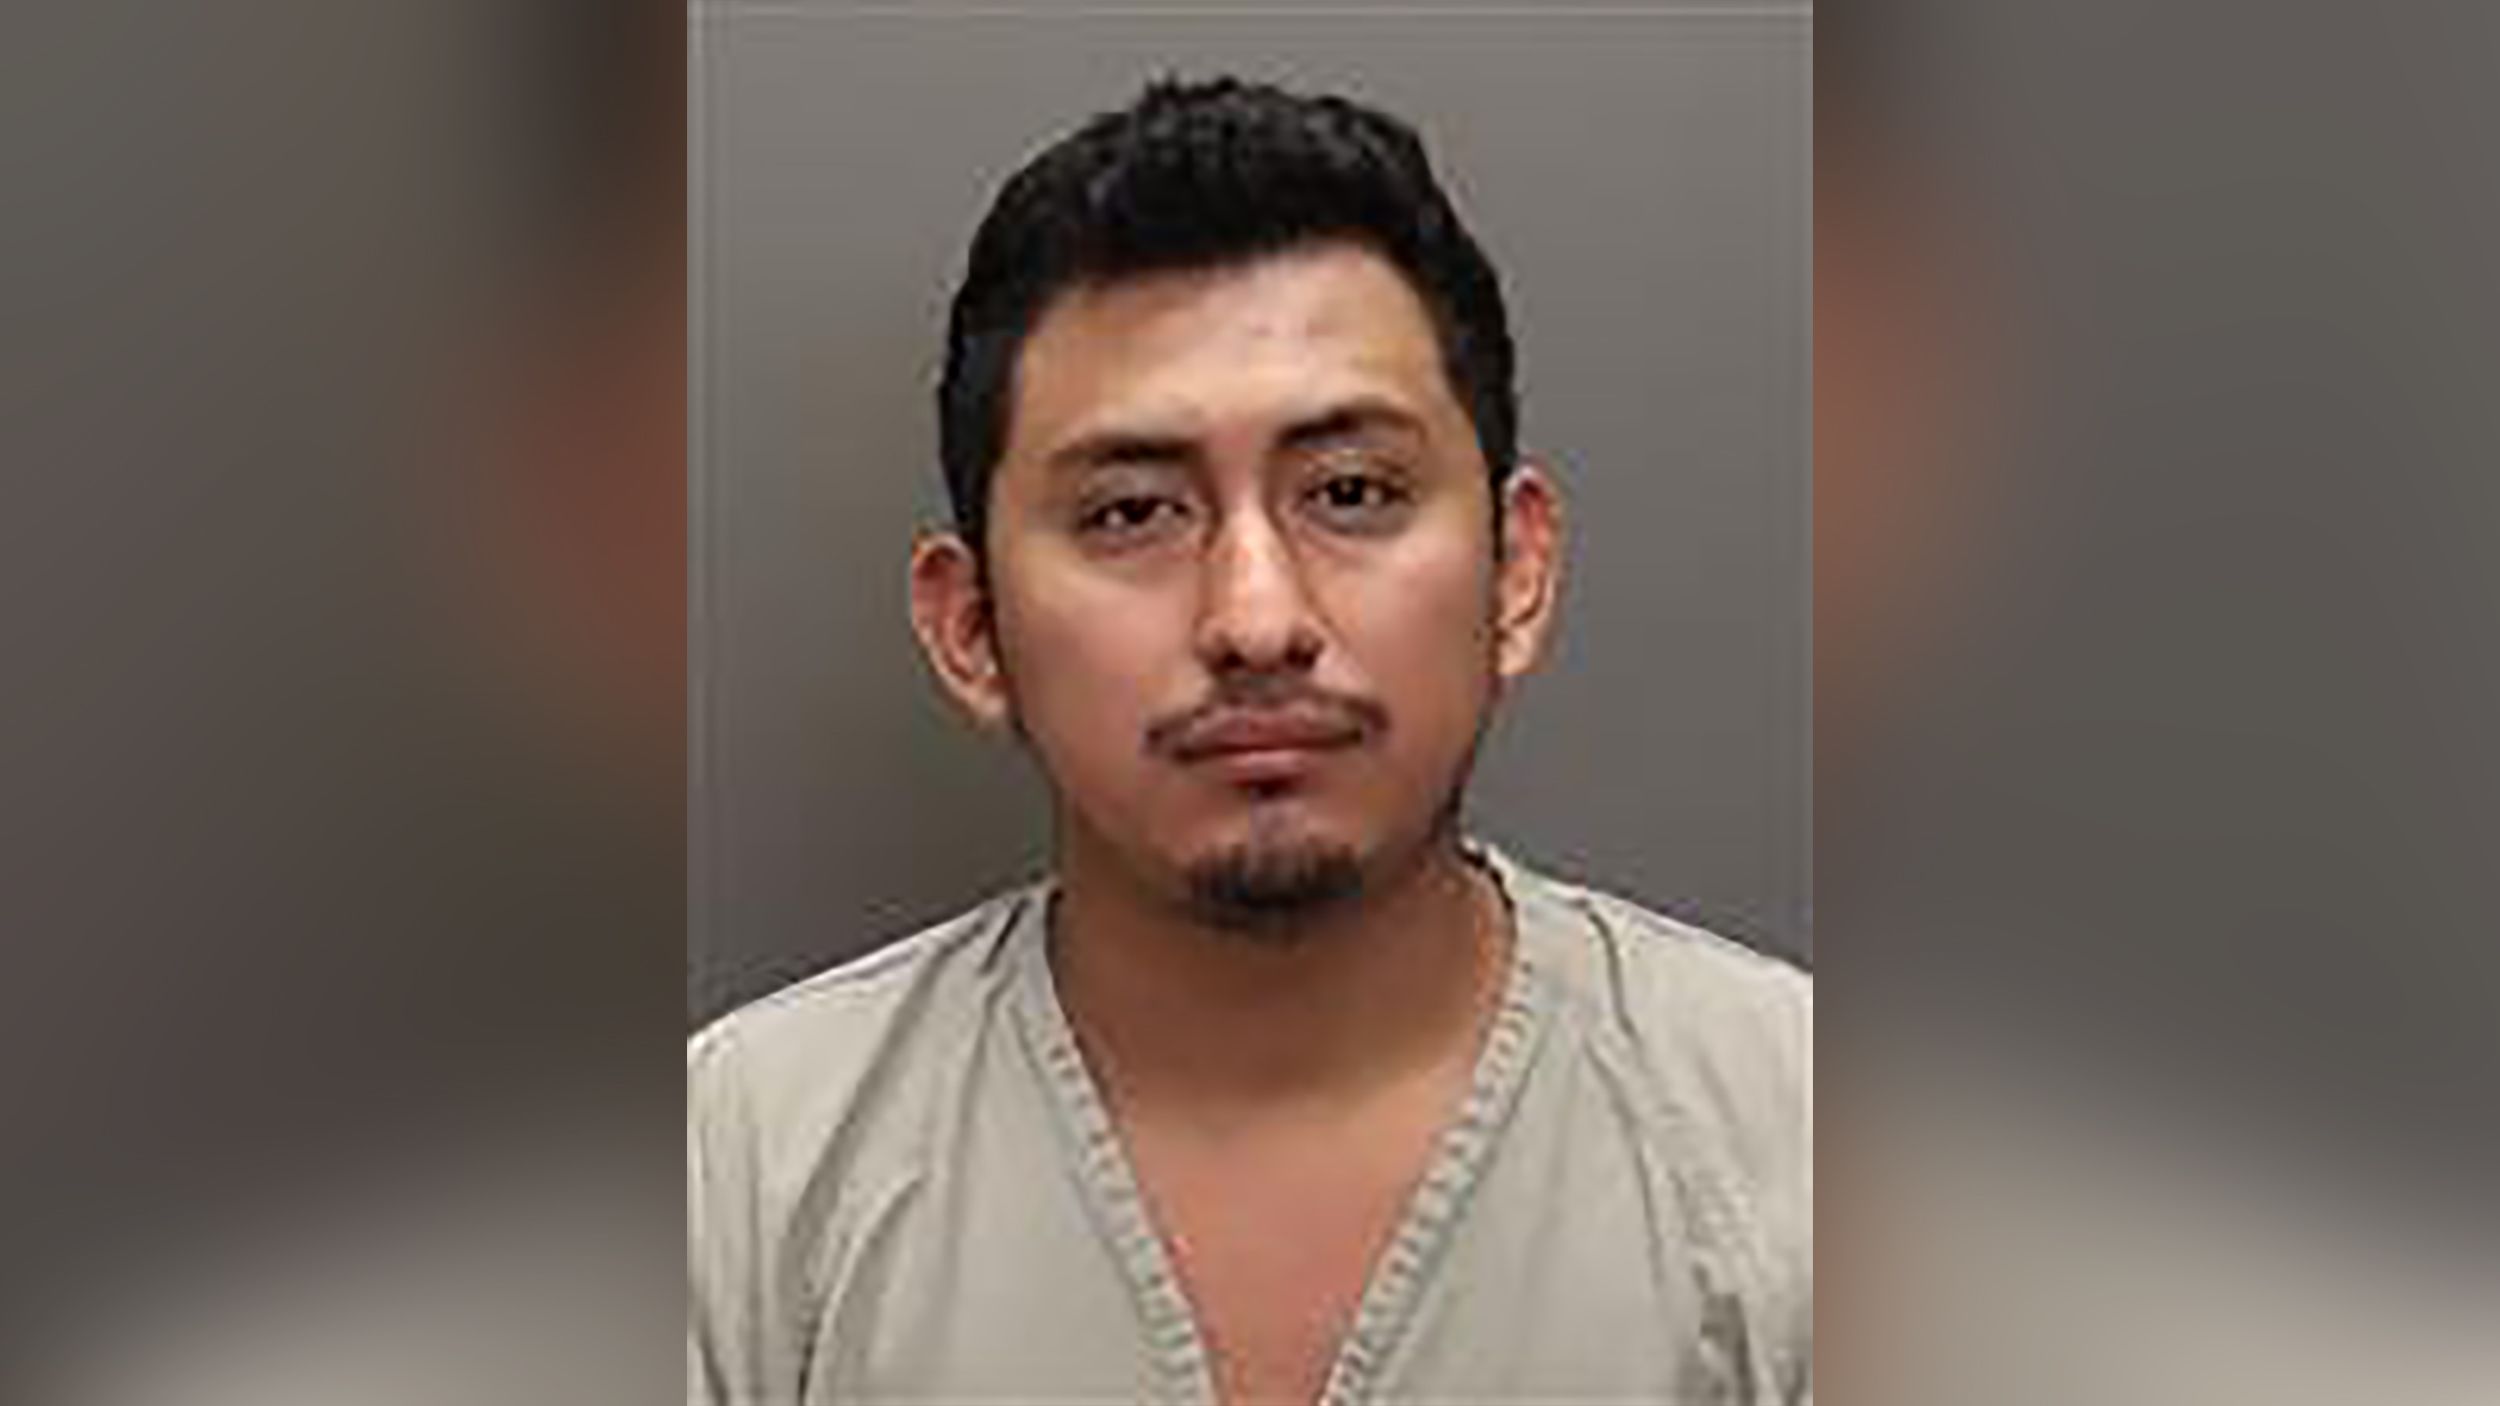 Mam Sleeping Sun Rap Sex - Gerson Fuentes was charged in the rape of a 10-year-old Ohio girl who  traveled to Indiana for an abortion | CNN